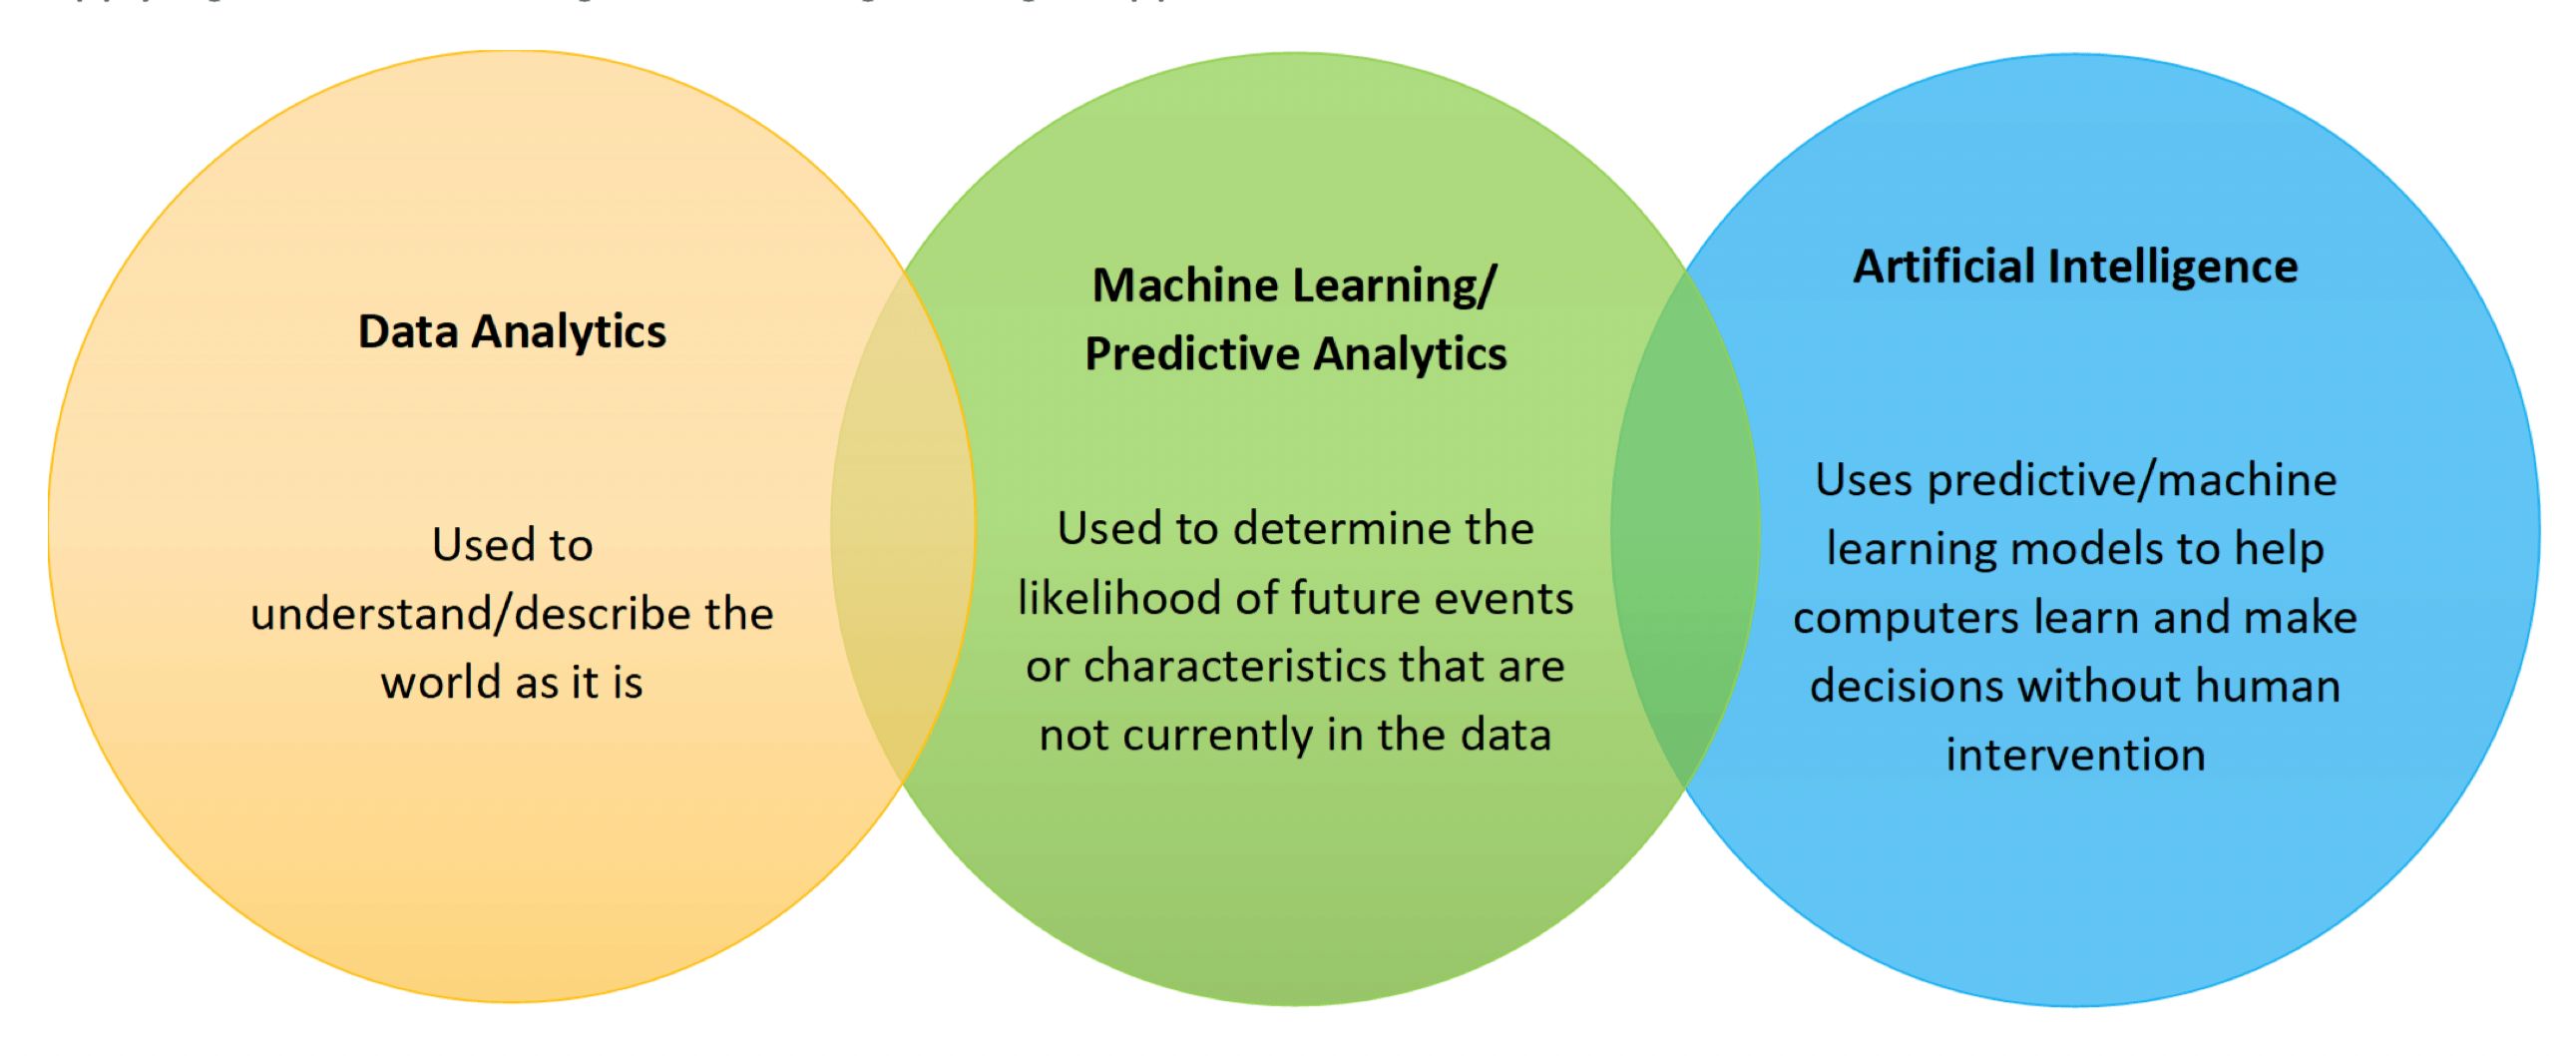 How Are Predictive Analytics And Machine Learning Related?